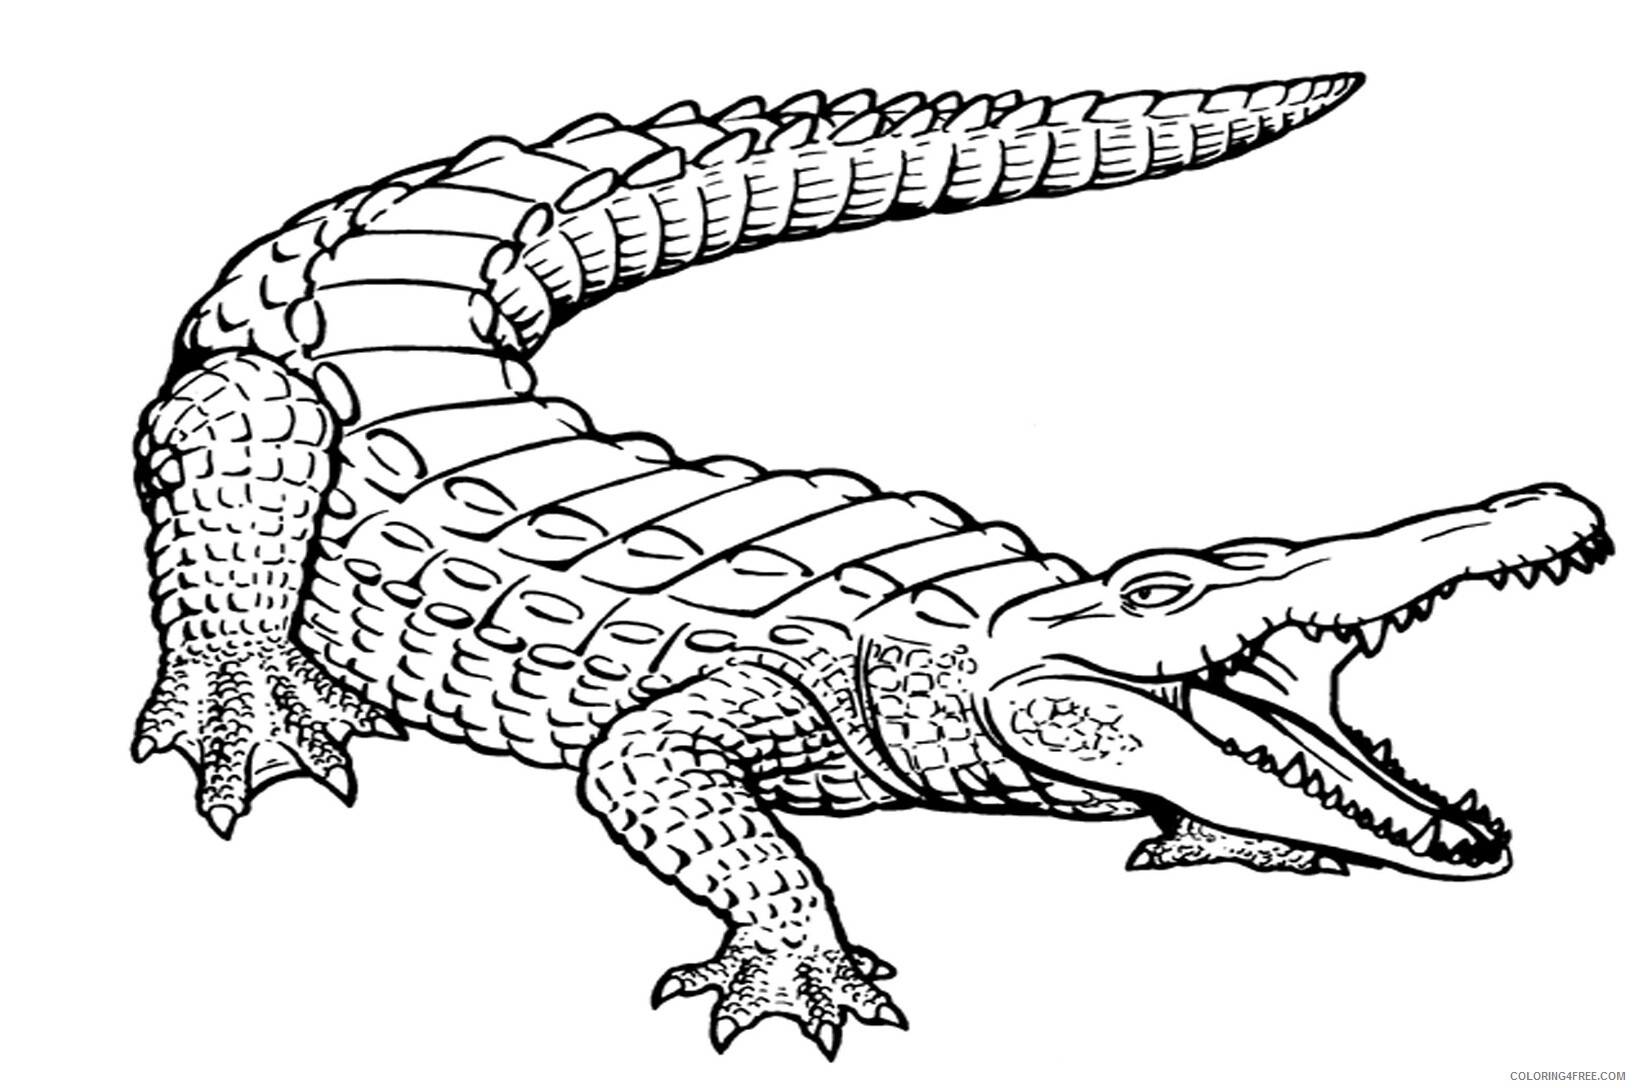 Alligator Coloring Pages Animal Printable Sheets Alligator 2021 0041 Coloring4free